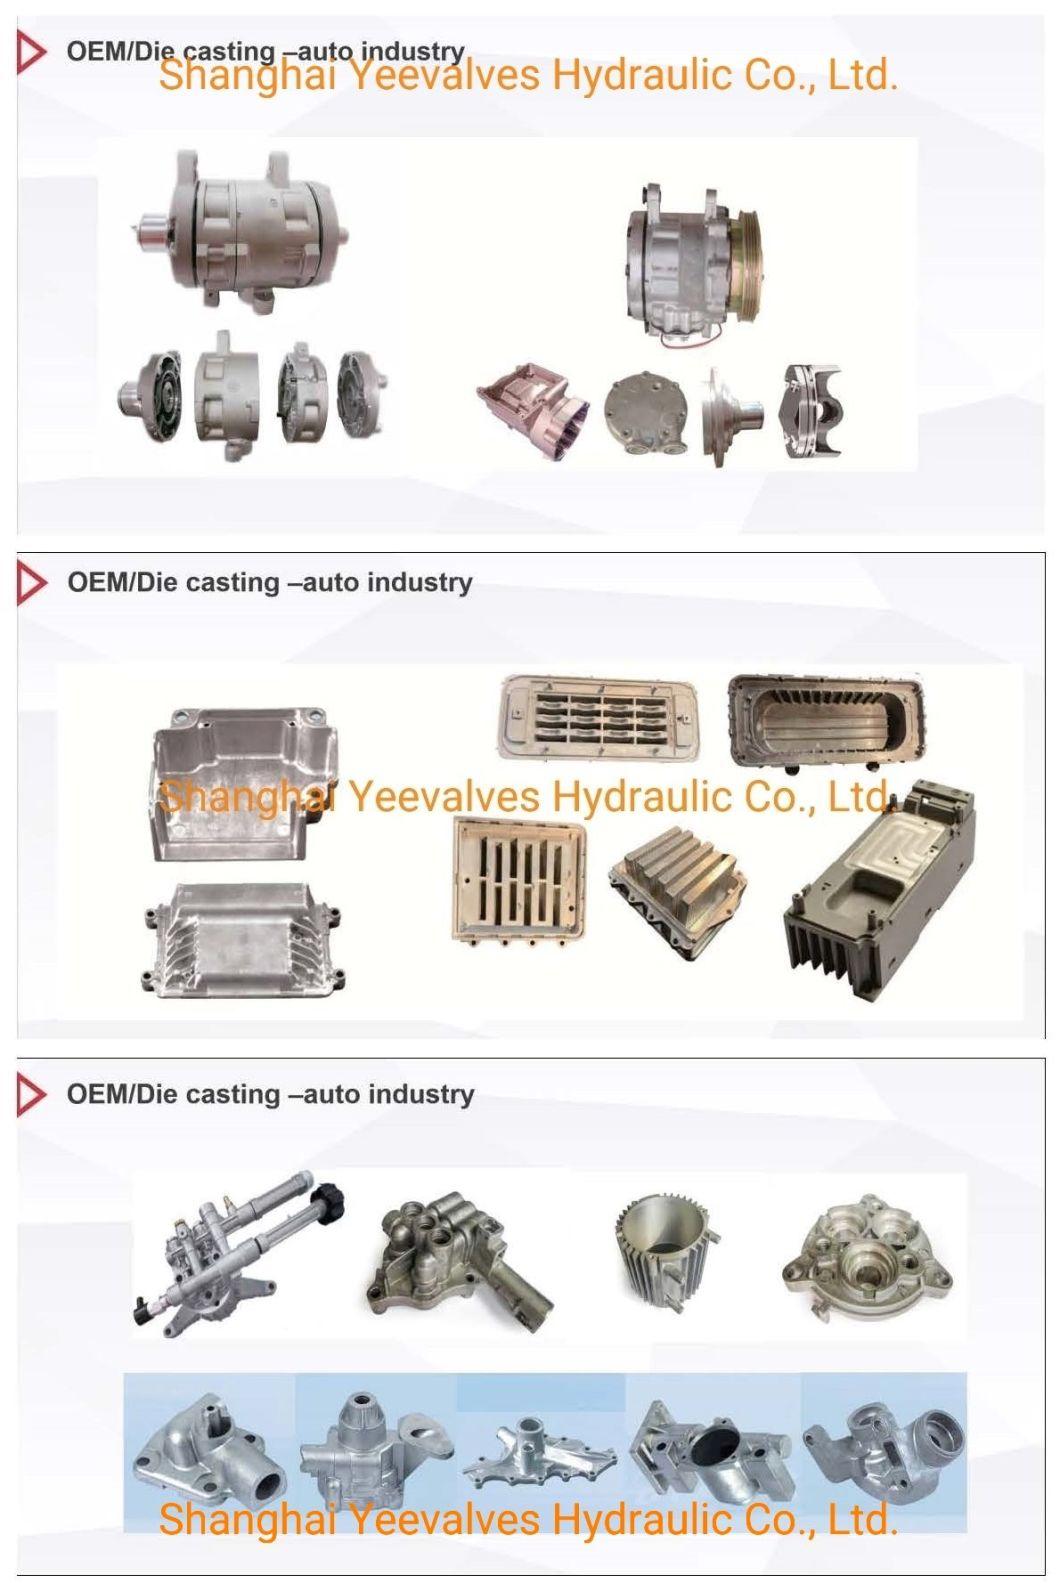 Sun Rexroth Hawe Cartridge Valve Hydraulic Flow Control Valves Relief Control Valves with CNC Machining Drilling